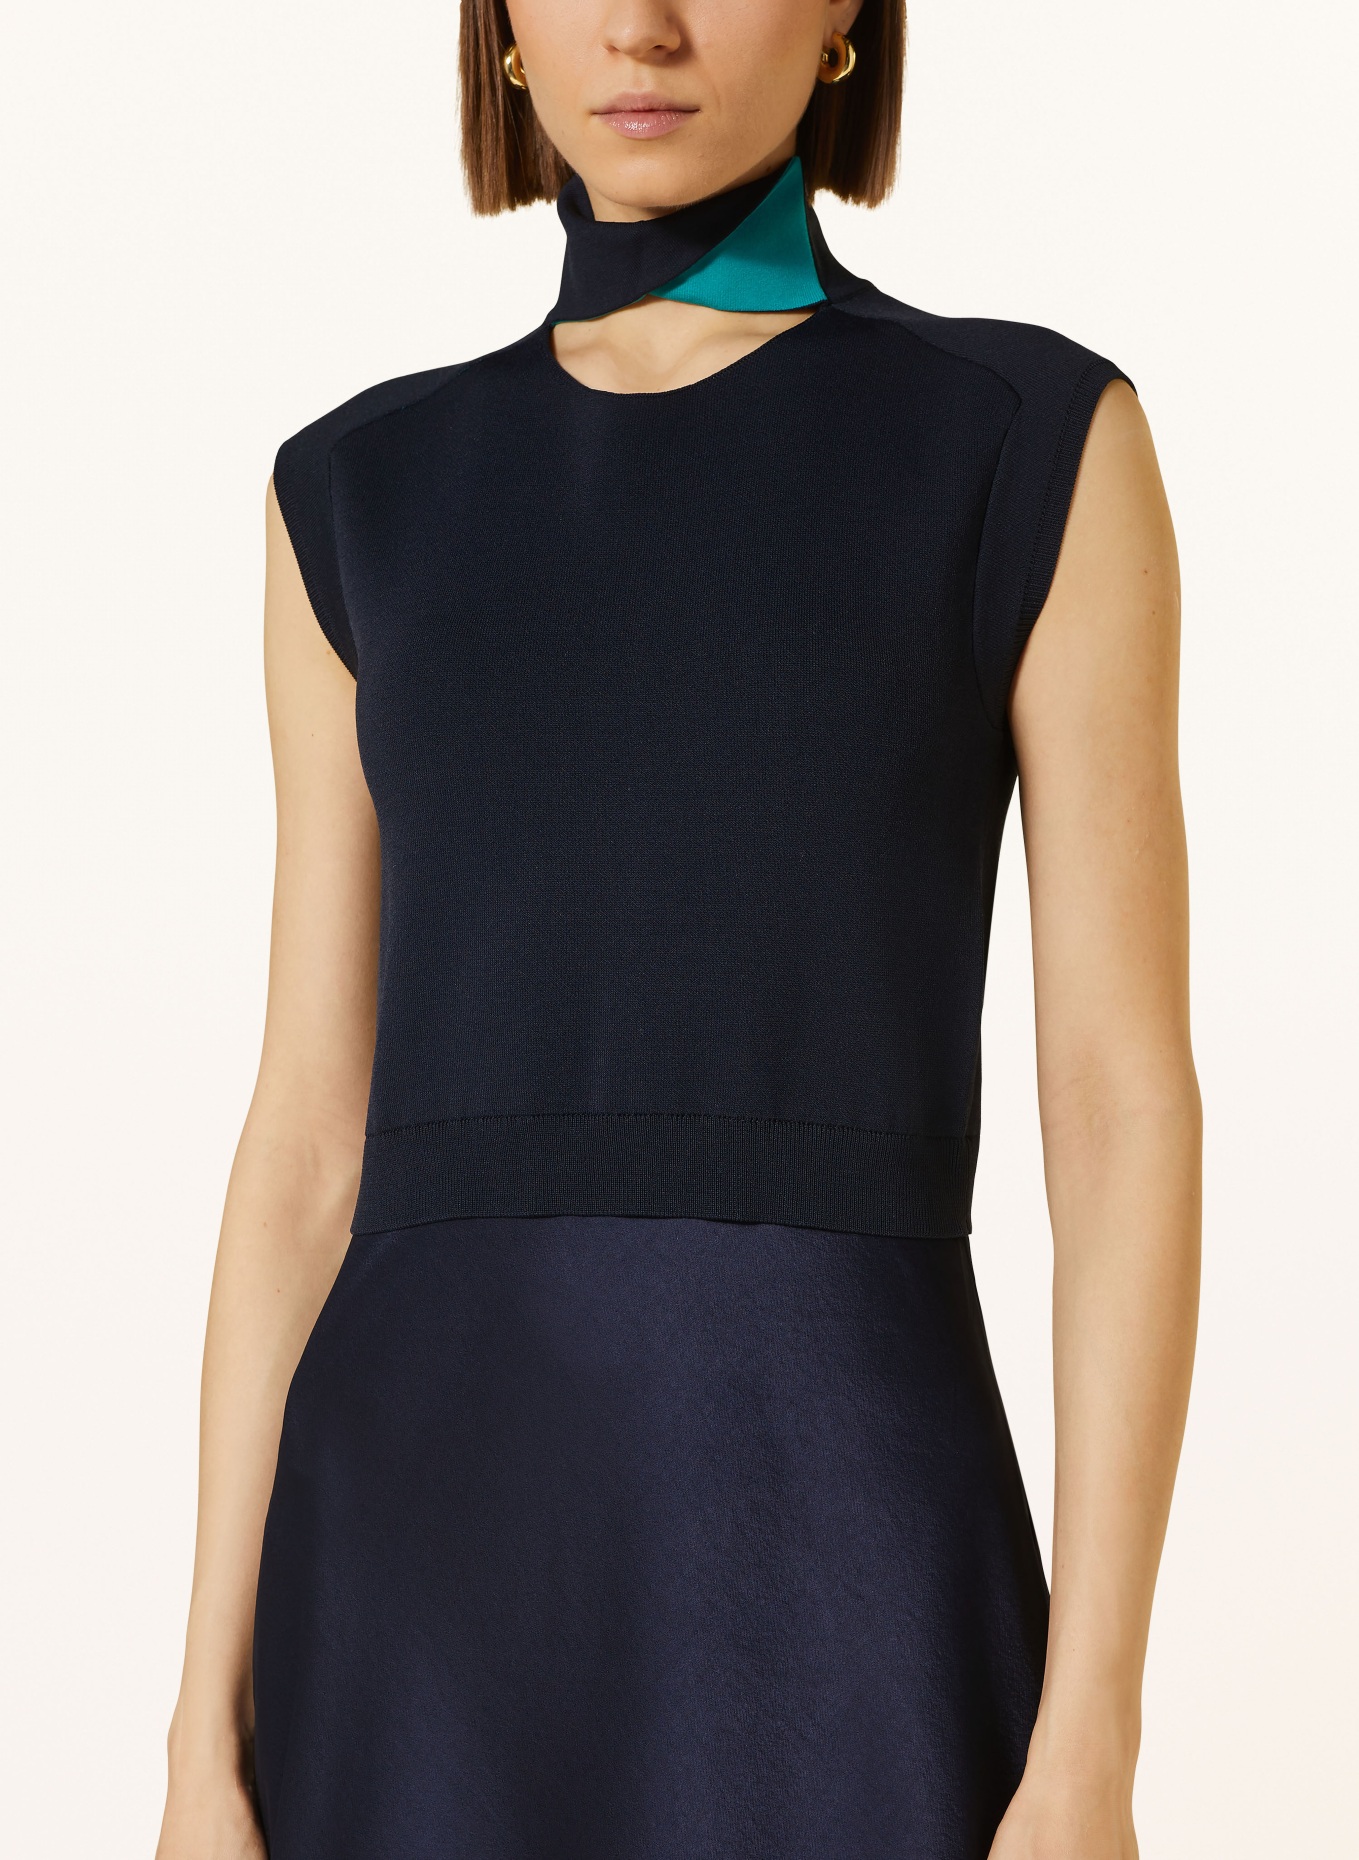 TED BAKER Dress PAOLLA in mixed materials with cut-out, Color: DARK BLUE (Image 4)